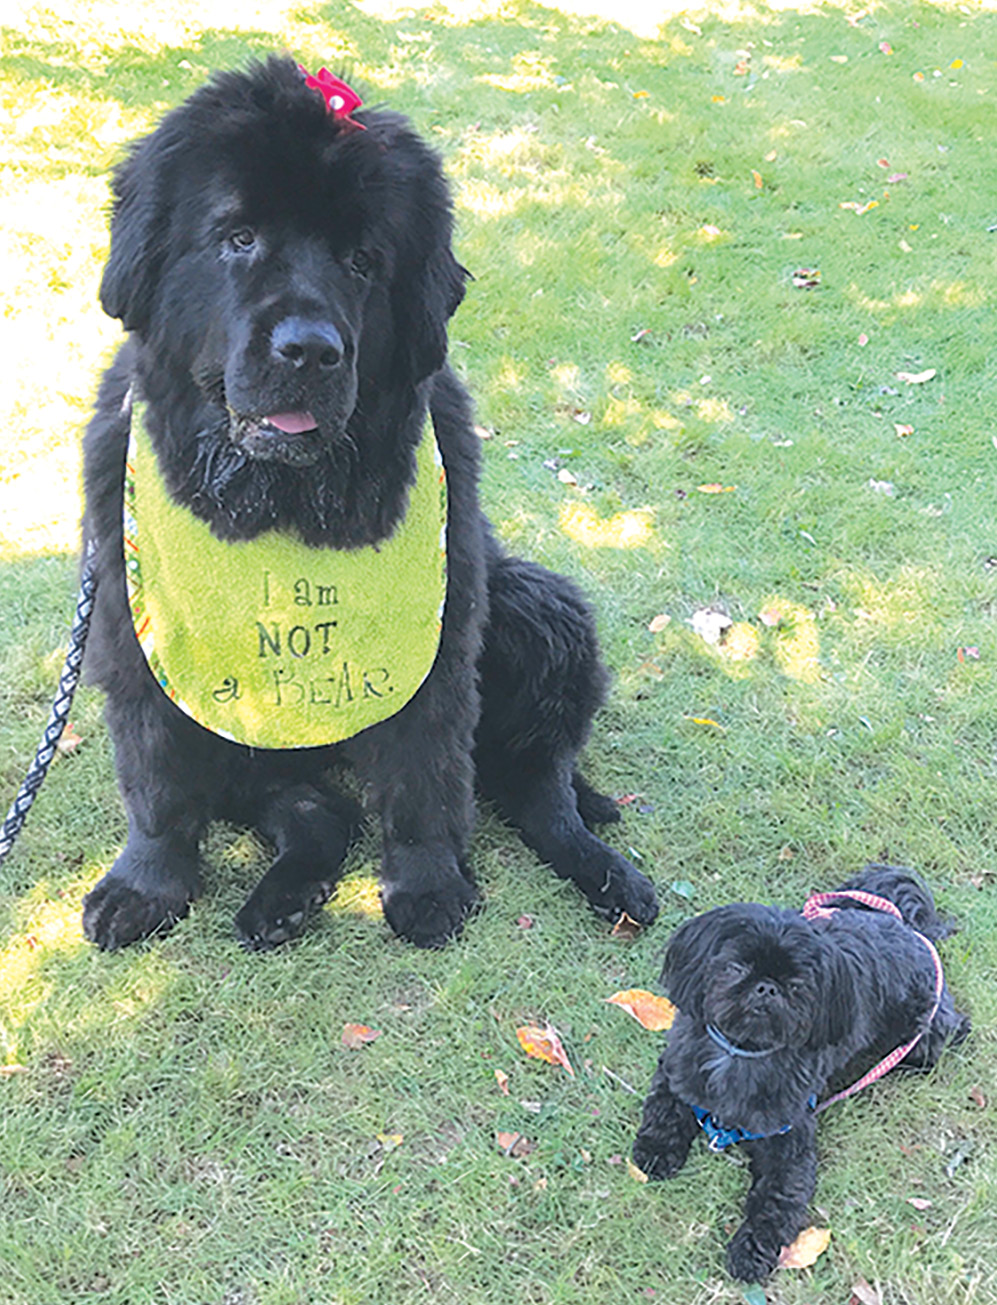 “Minnie” is the large Newfoundland, who won”Best in Show,” with a bib that says”I am Not a Bear” standing with a three-year-old Toy Shih Tzu, Chloe, who won “Most Athletic.”